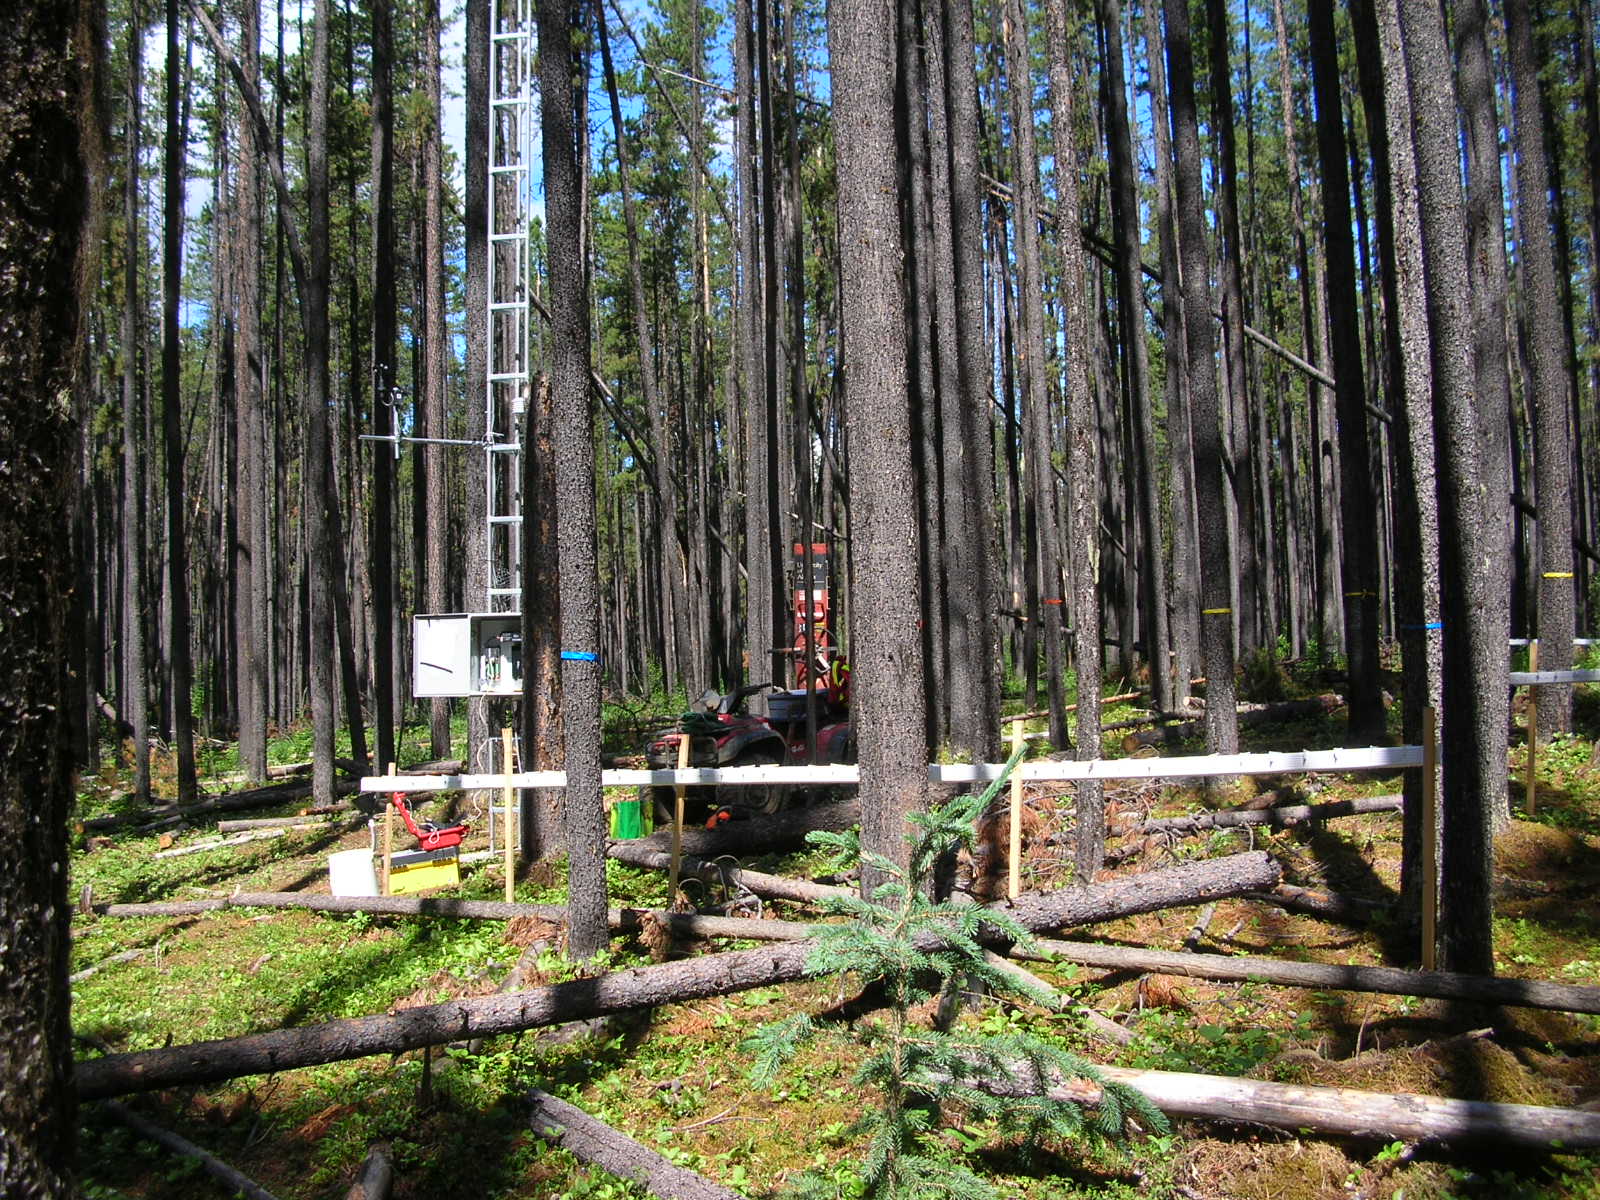 Development of monitoring tools to detect mountain pine beetle at low densities on the eastern and northern edge of beetle expansion into Saskatchewan and NWT